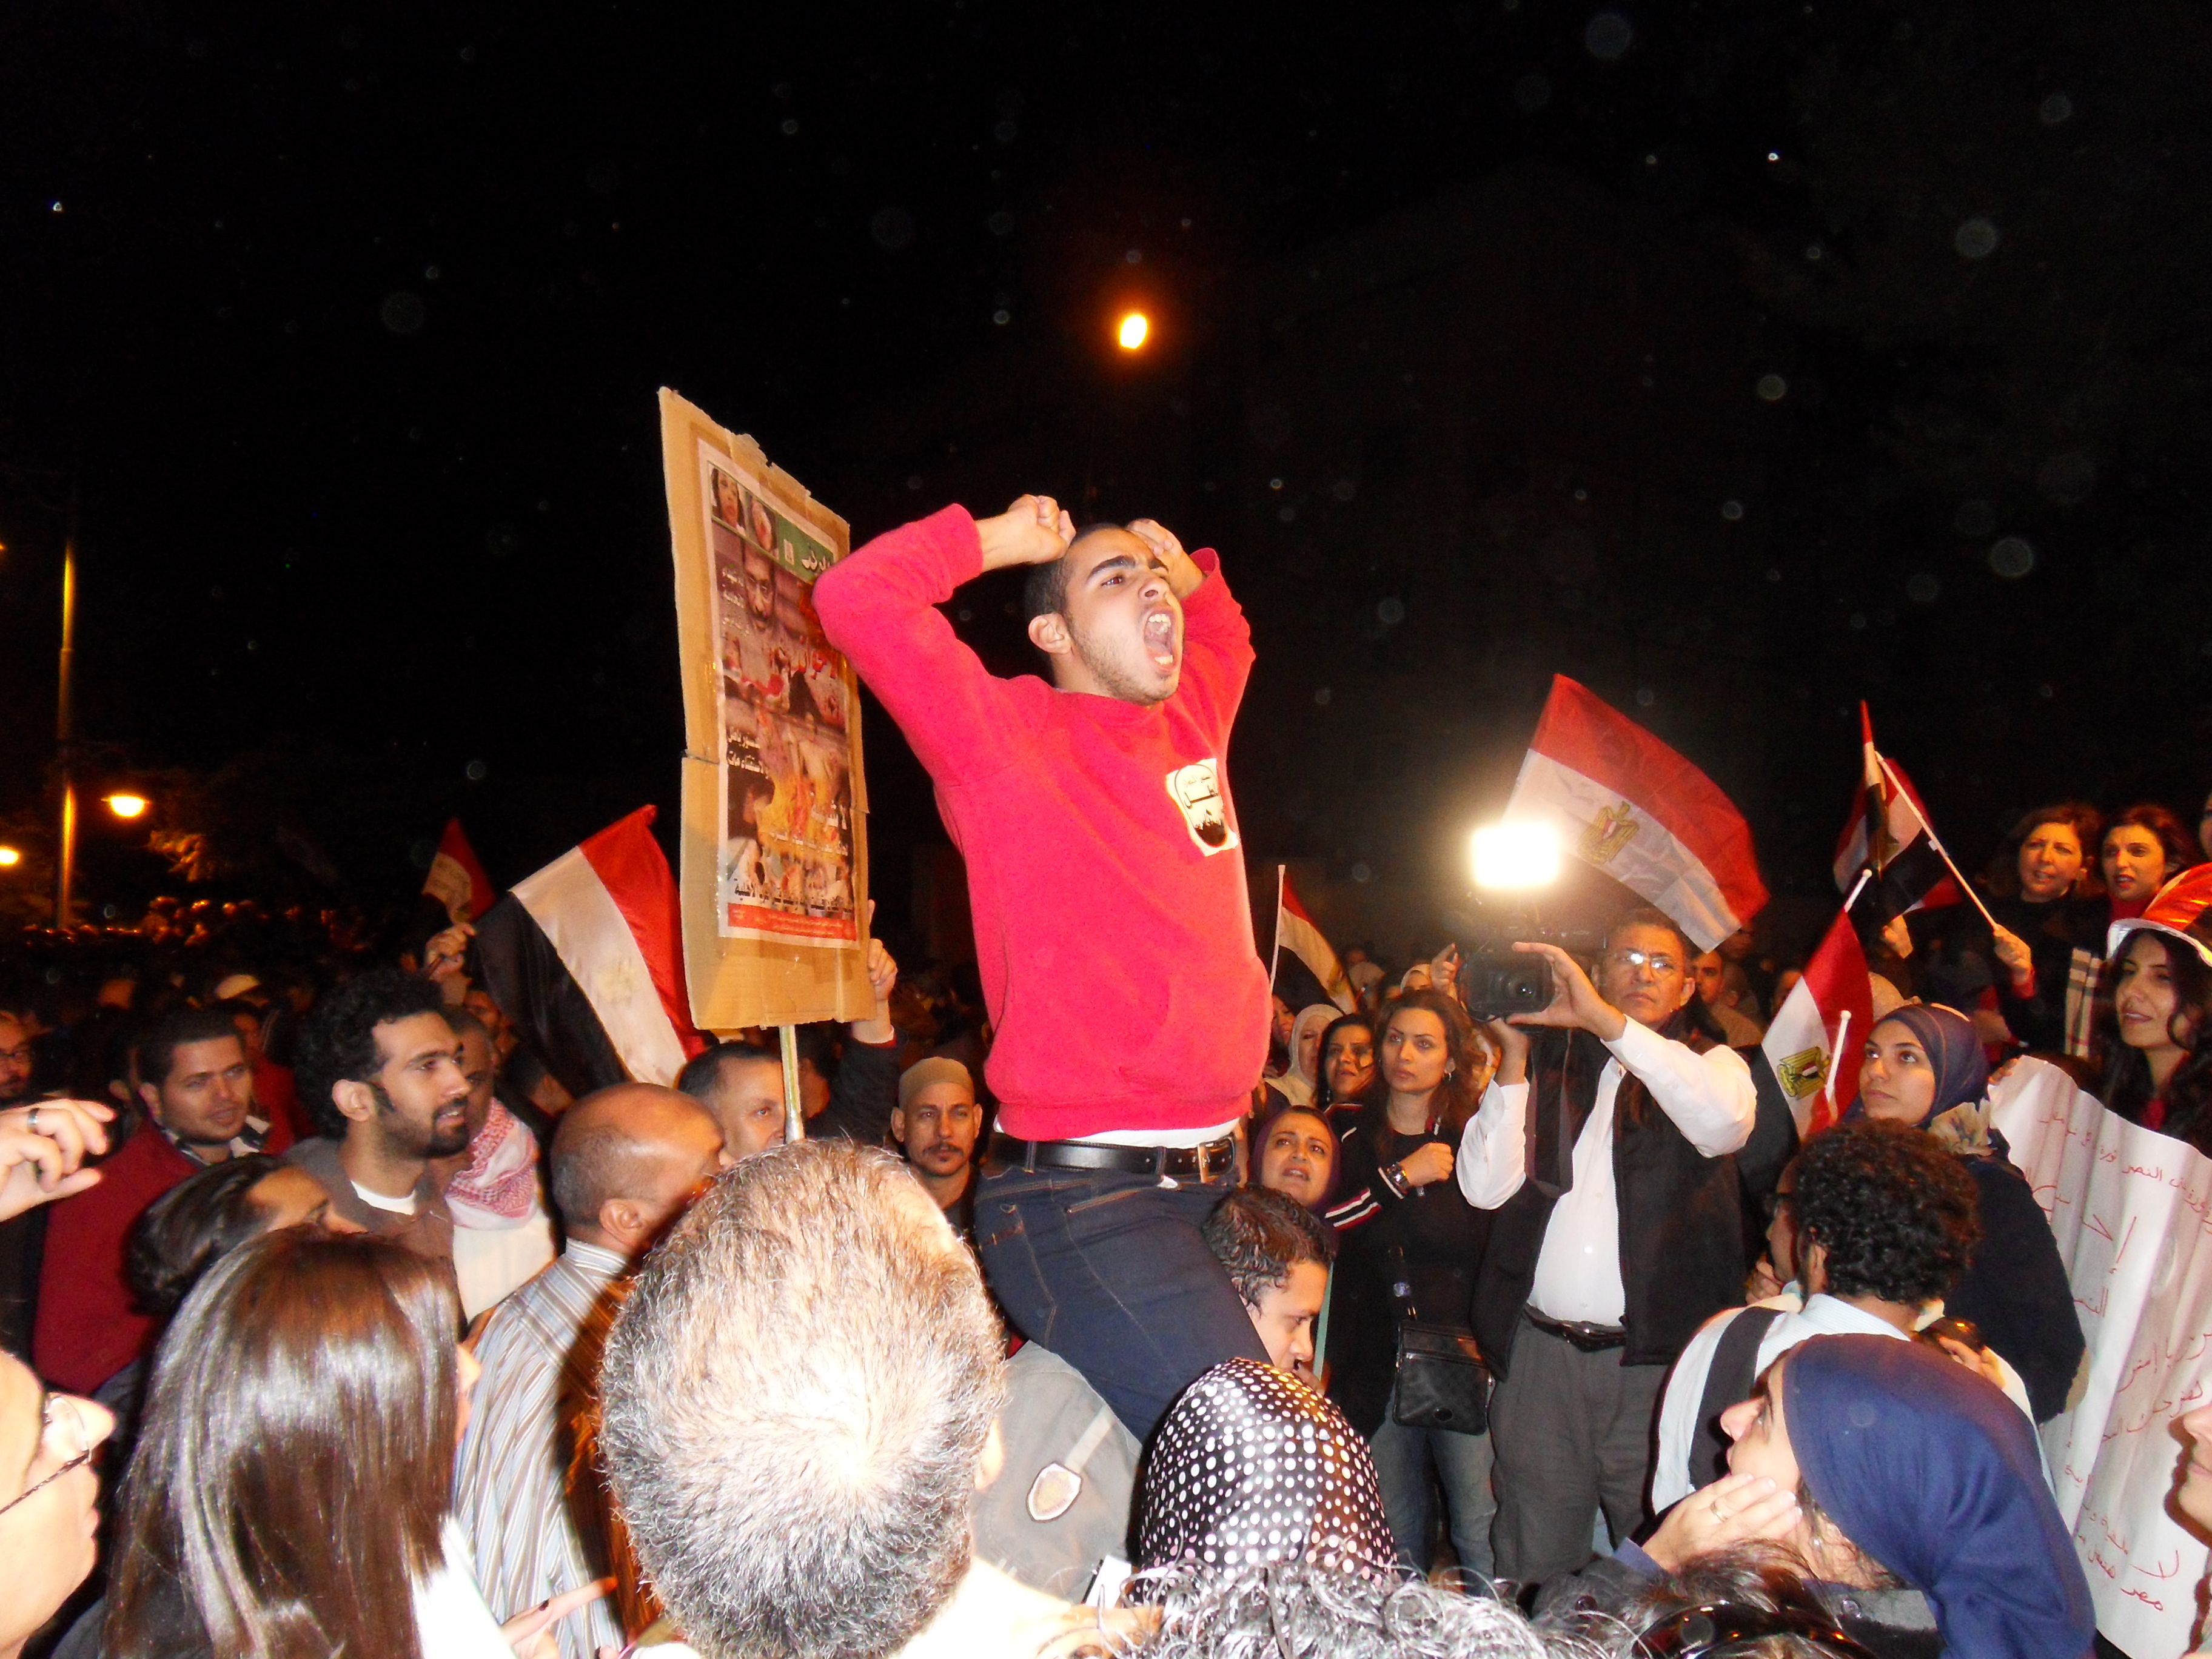 Protesters chanting against Morsi.